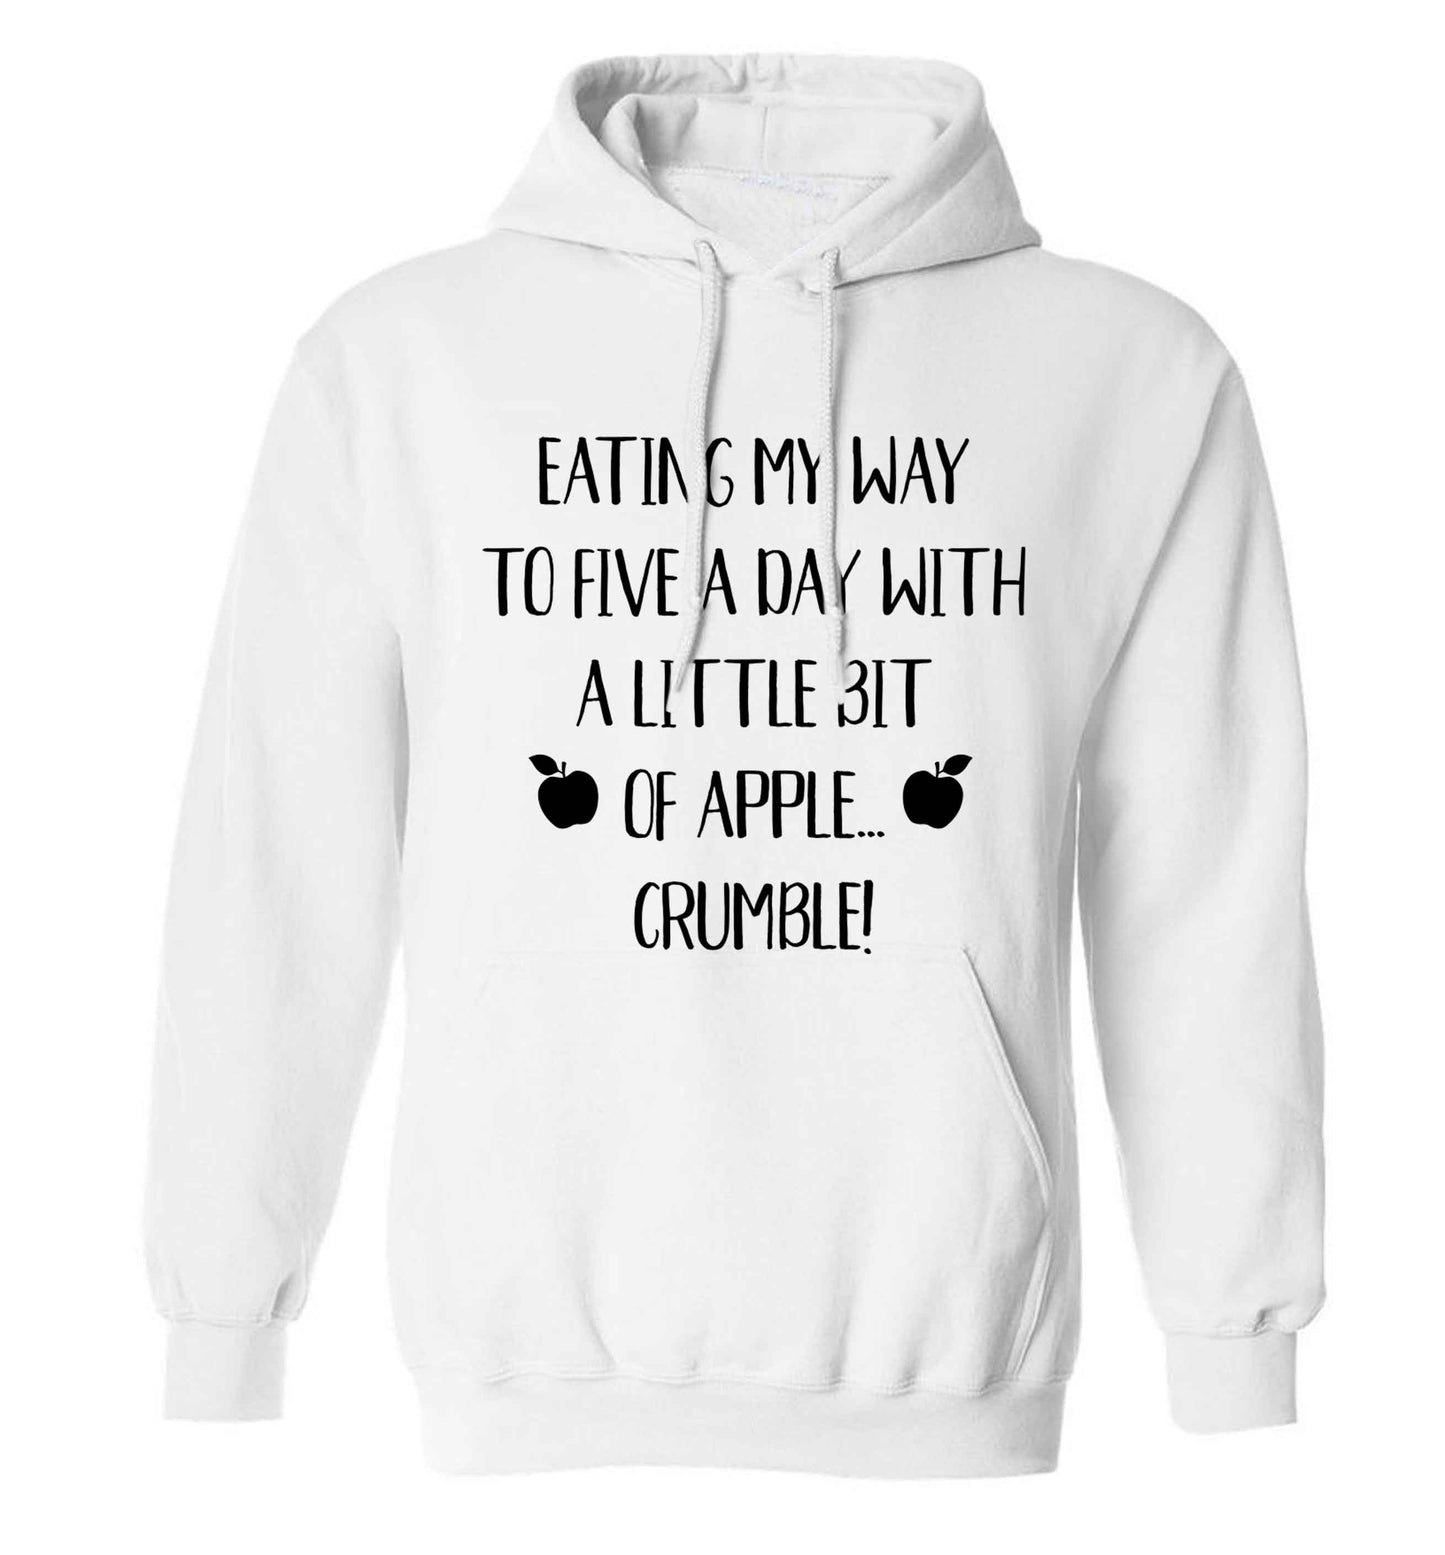 Eating my way to five a day with a little bit of apple crumble adults unisex white hoodie 2XL